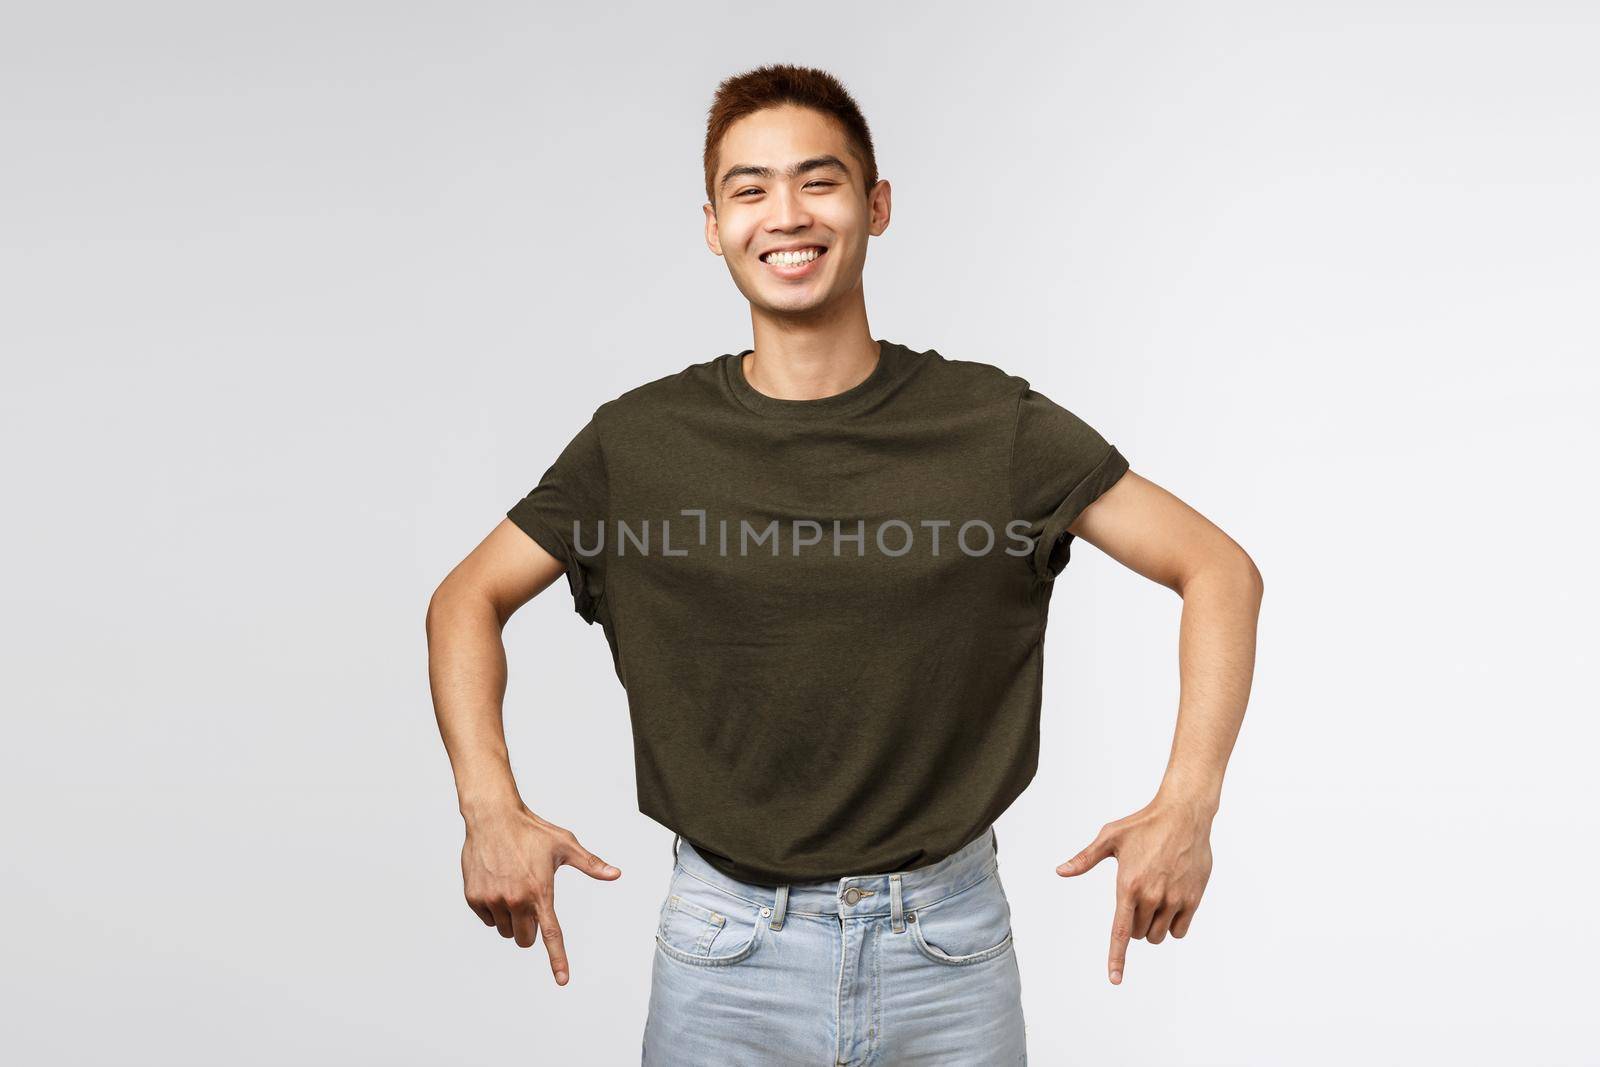 Portrait of cheerful asian man in greey t-shirt, laughing and smiling joyfully, pointing fingers down, invite to click link, subscribe or find out offer details at bottom banner, grey background.